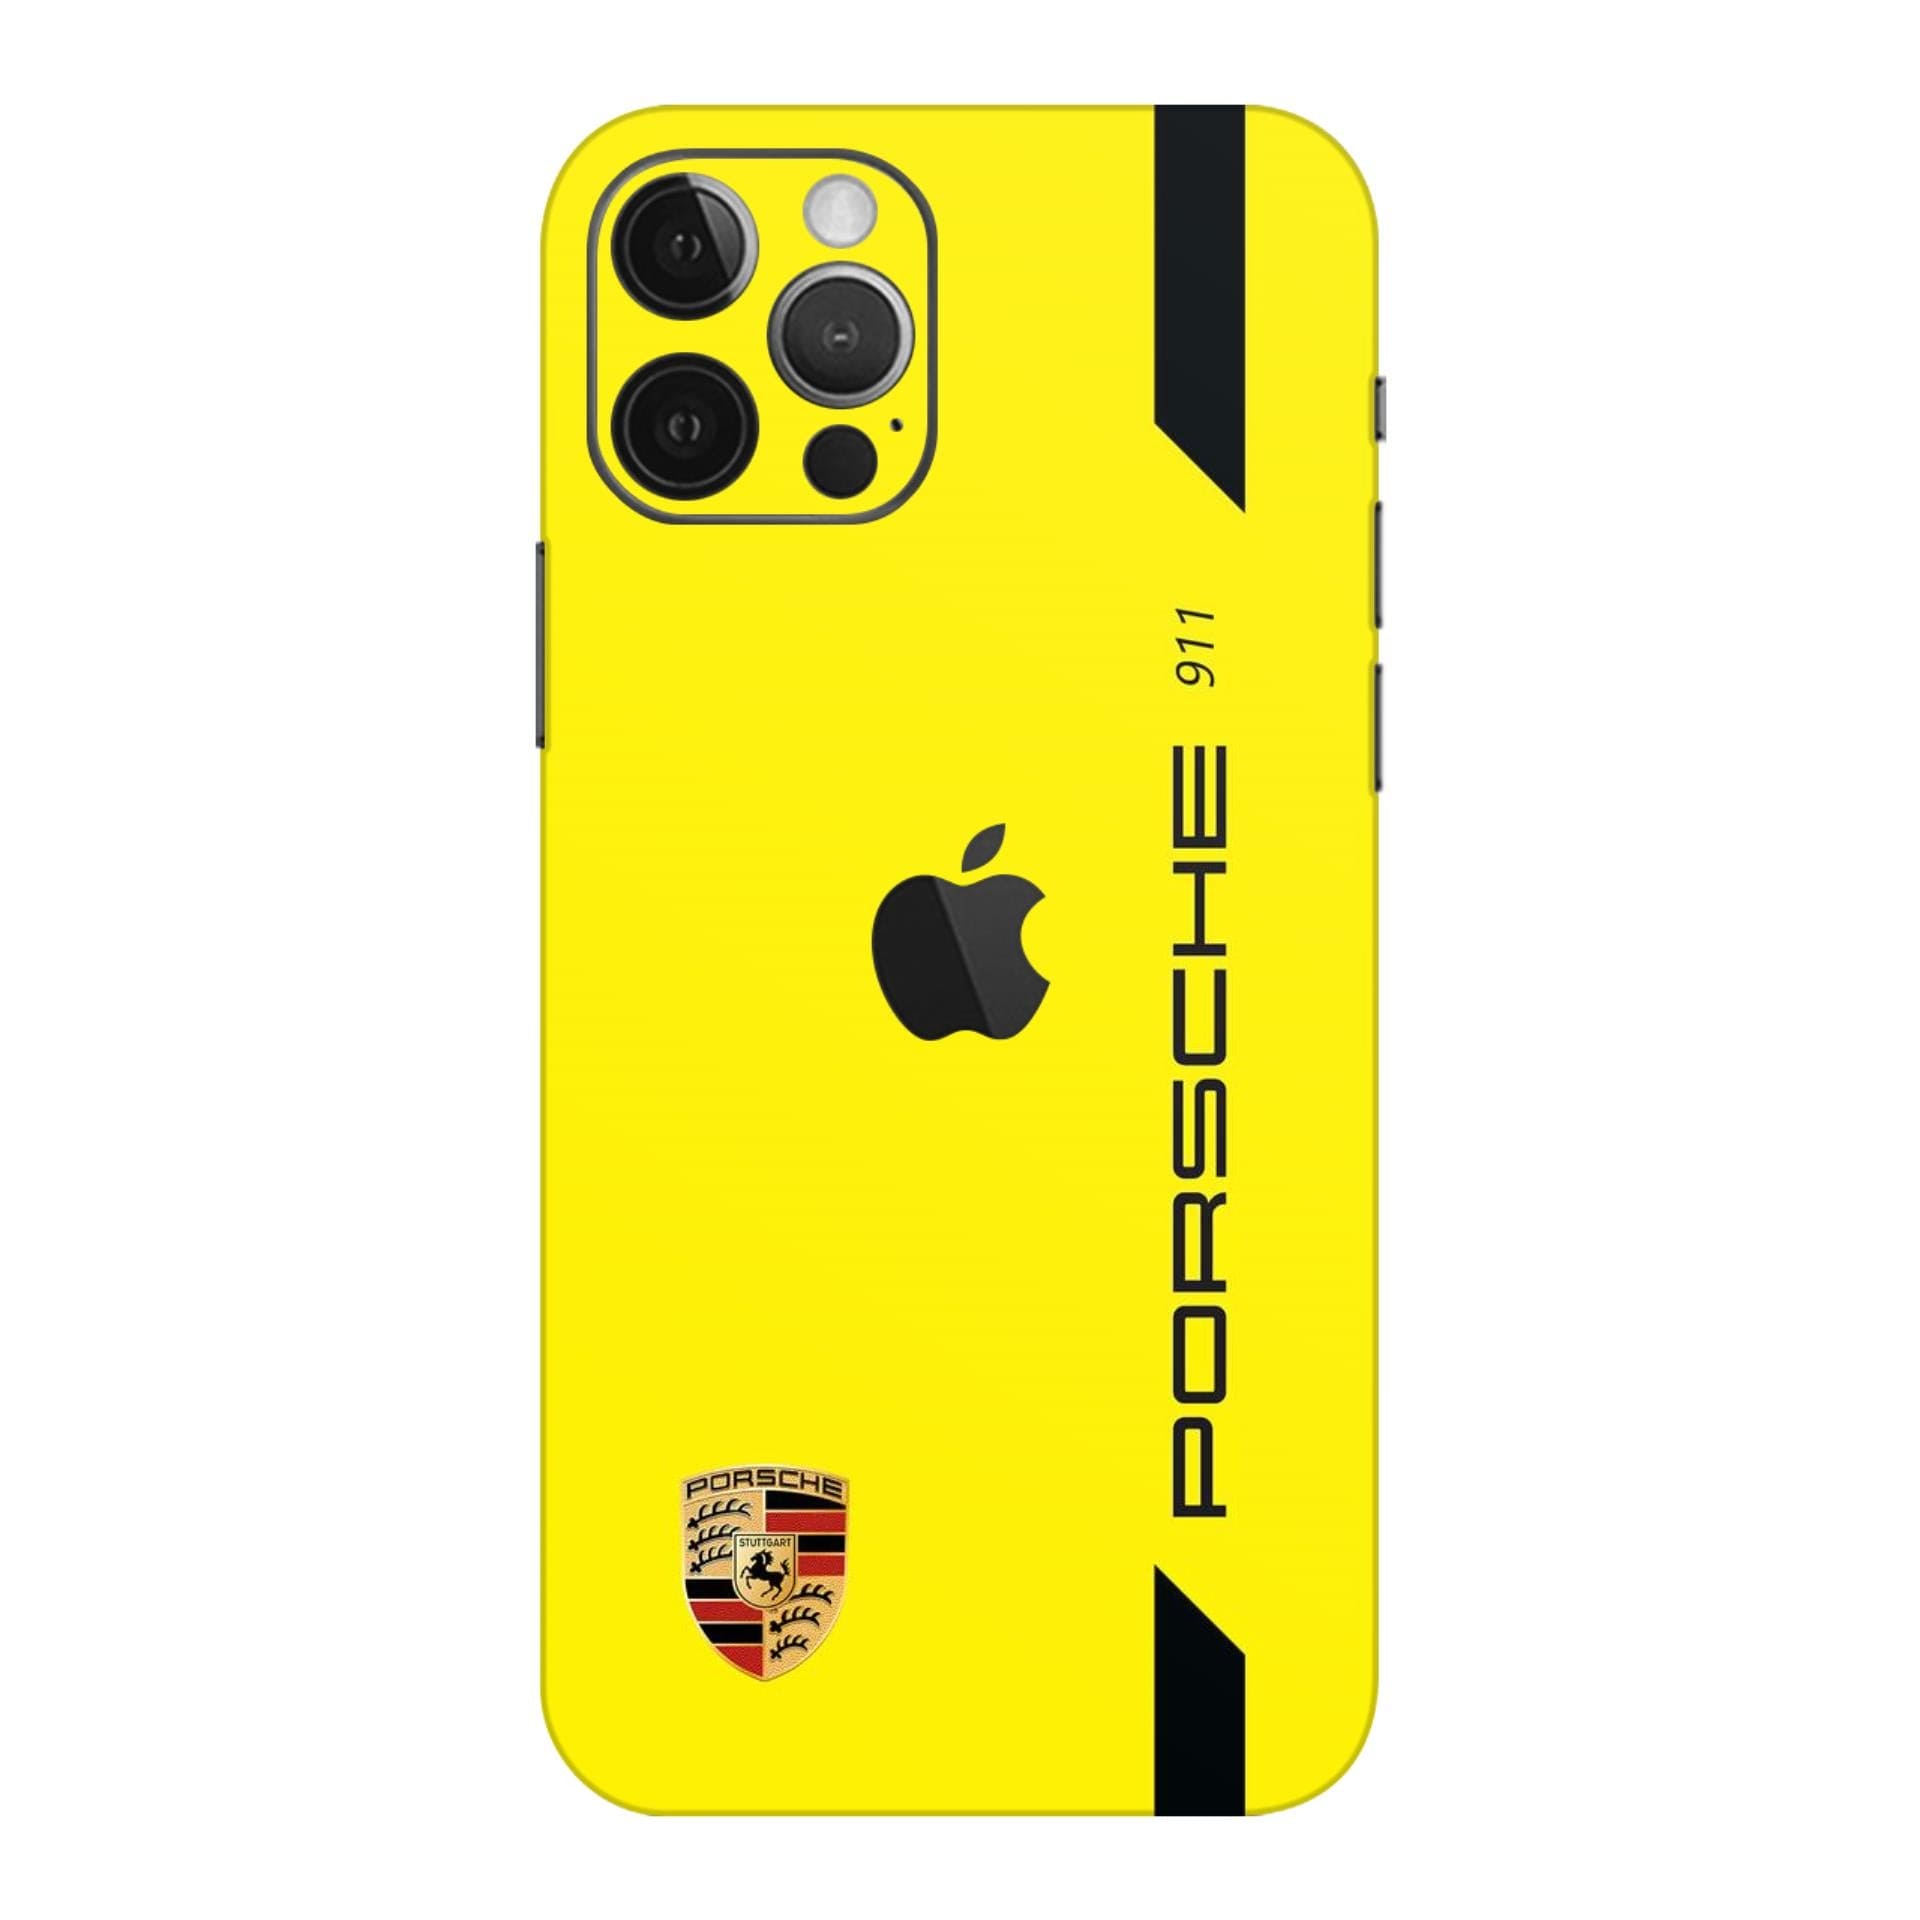 iphone 12 Pro Max Porsched skins